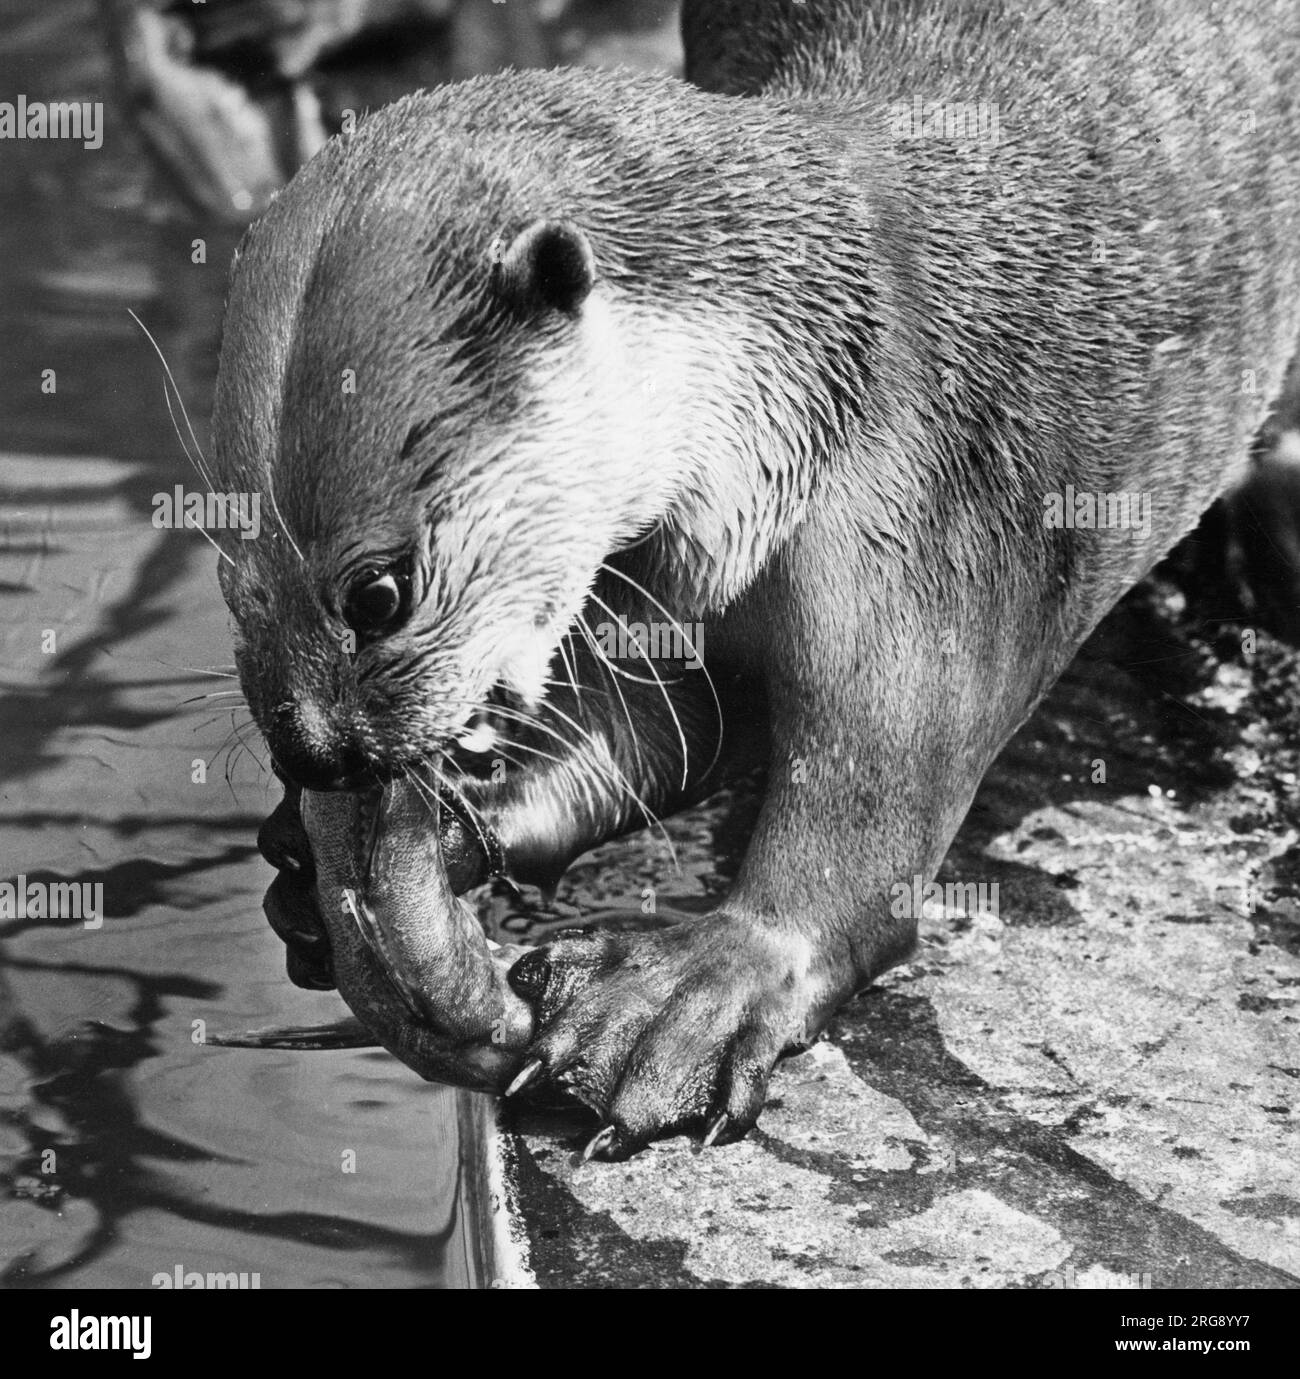 An otter tears into a fish he has just caught. Stock Photo